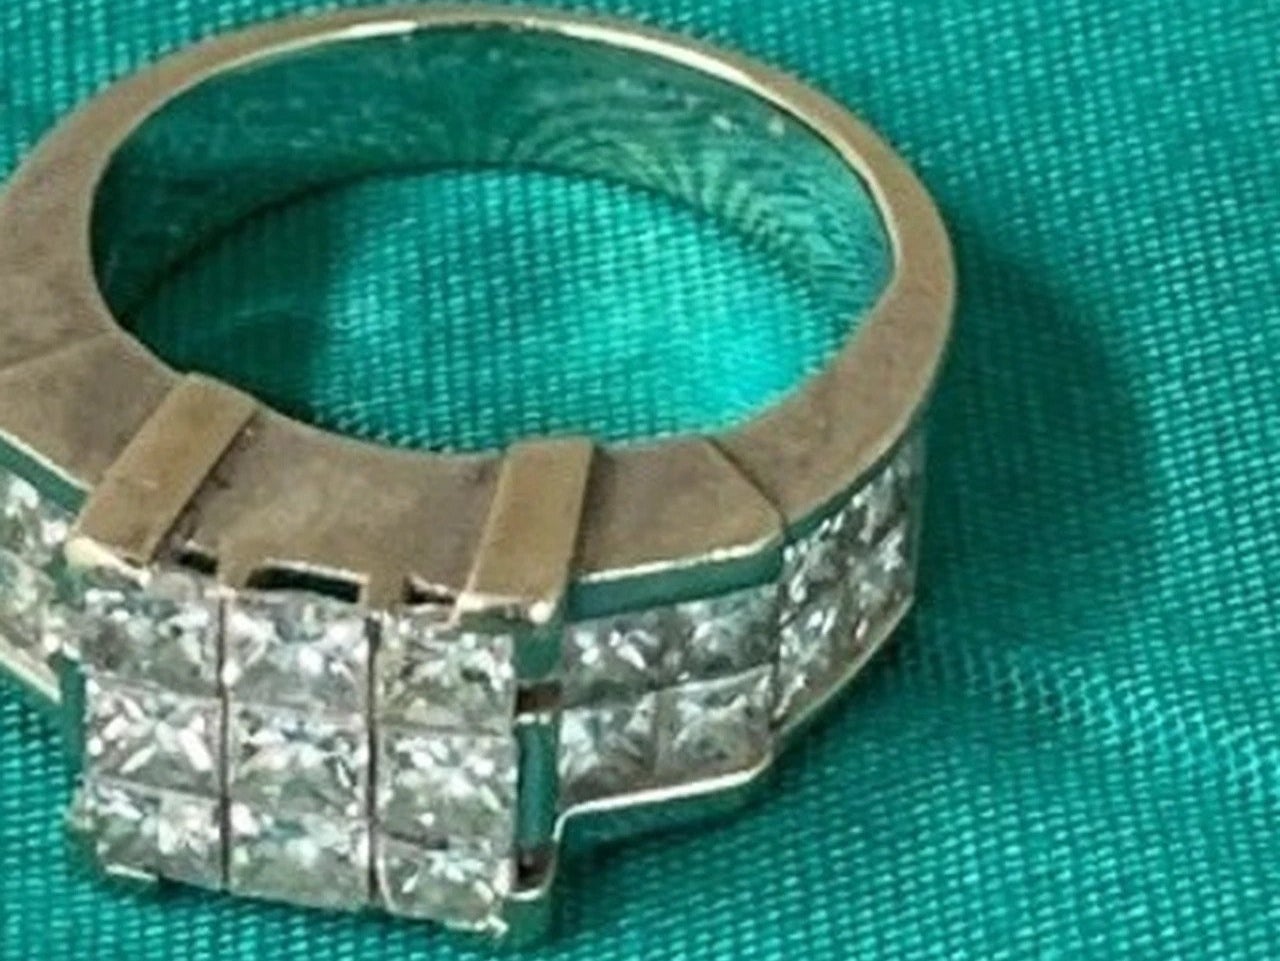 The state of Alabama auctioned off a wedding ring that belonged to a woman who was murdered